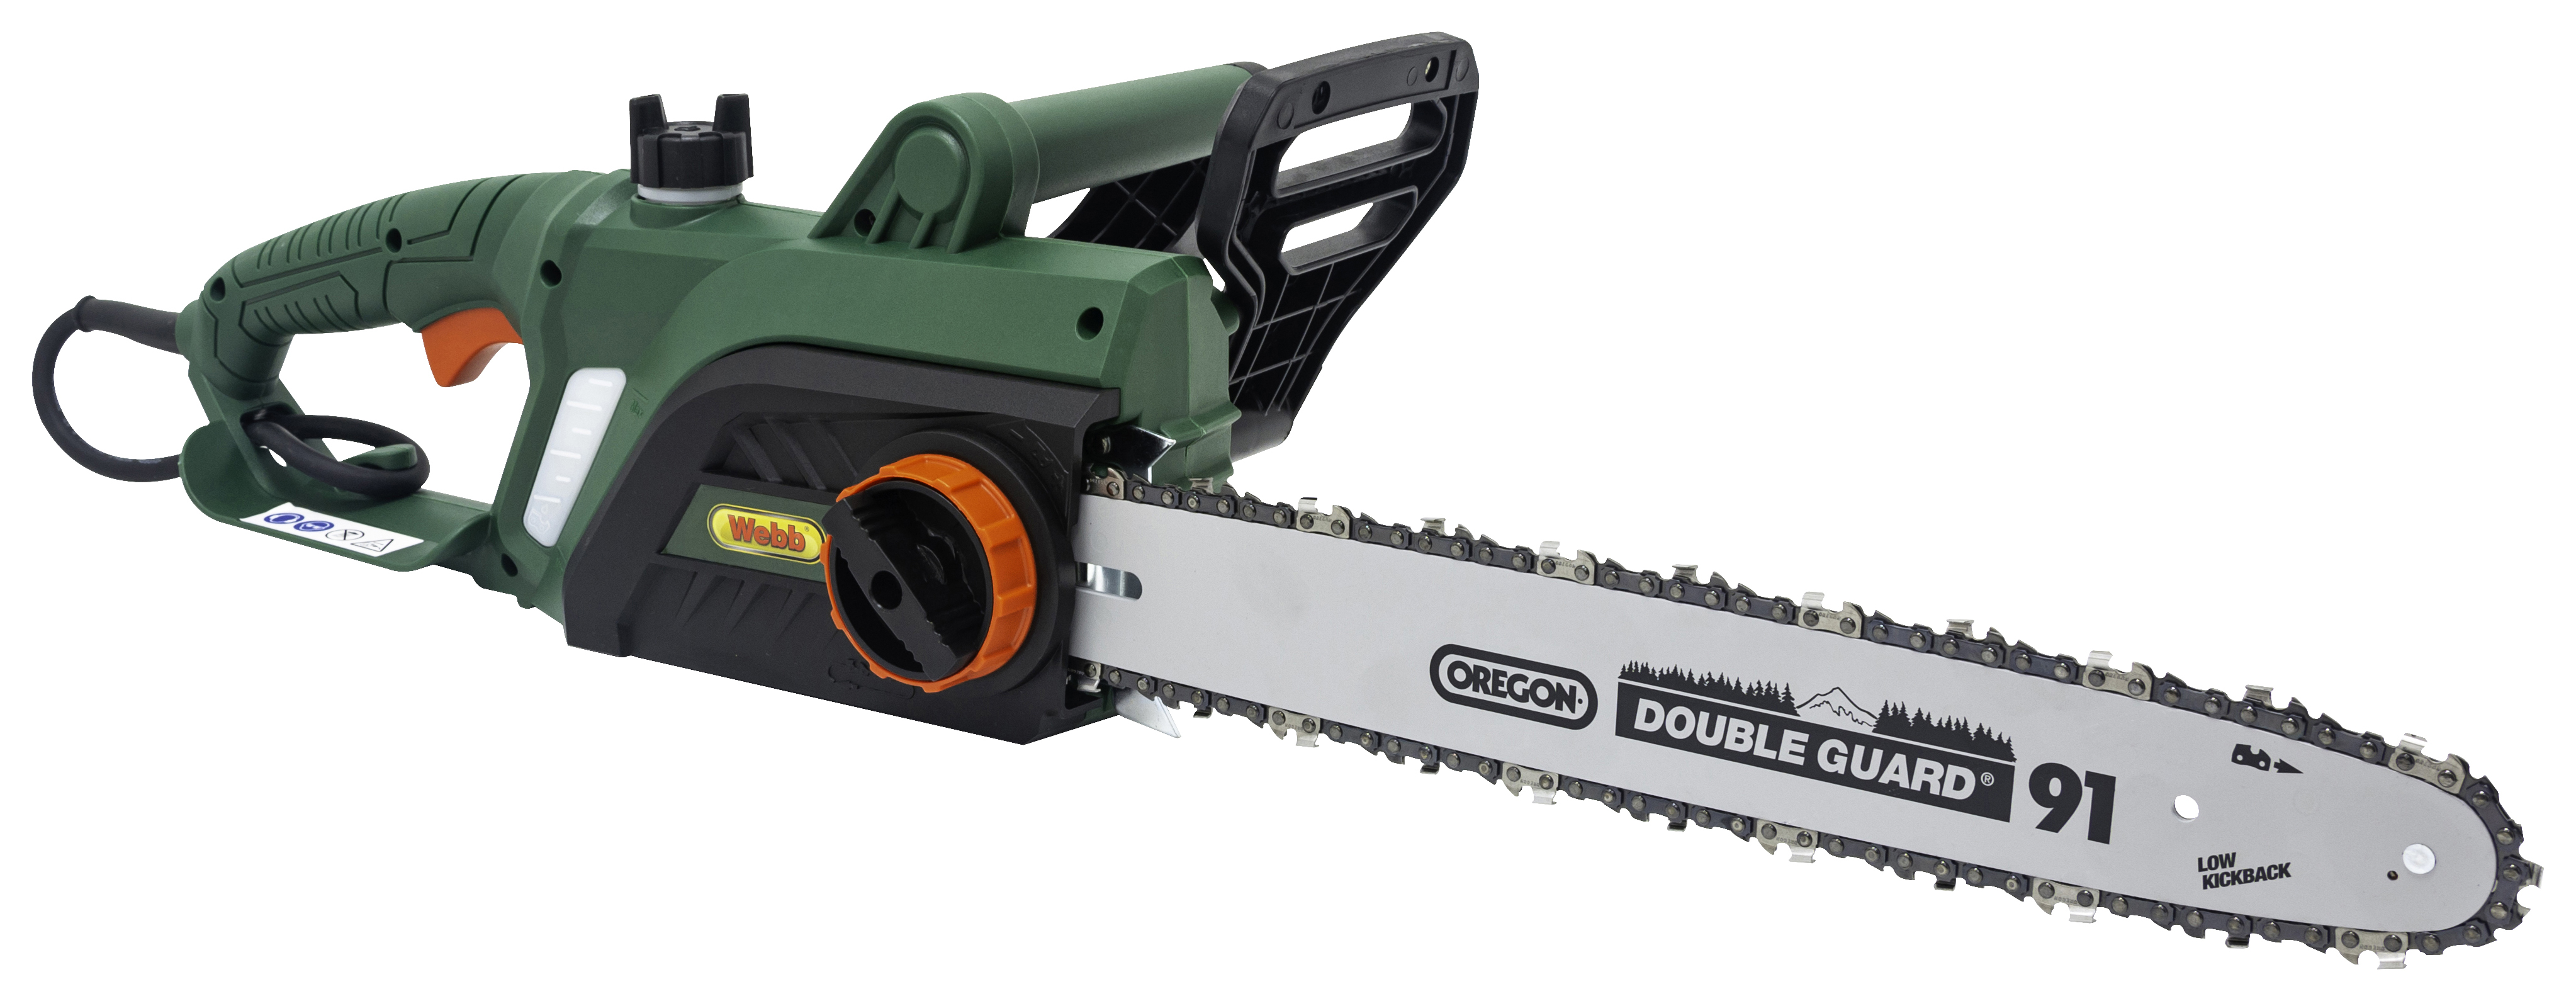 Image of Webb WEECS402200 2200W Electric Chainsaw - 40cm